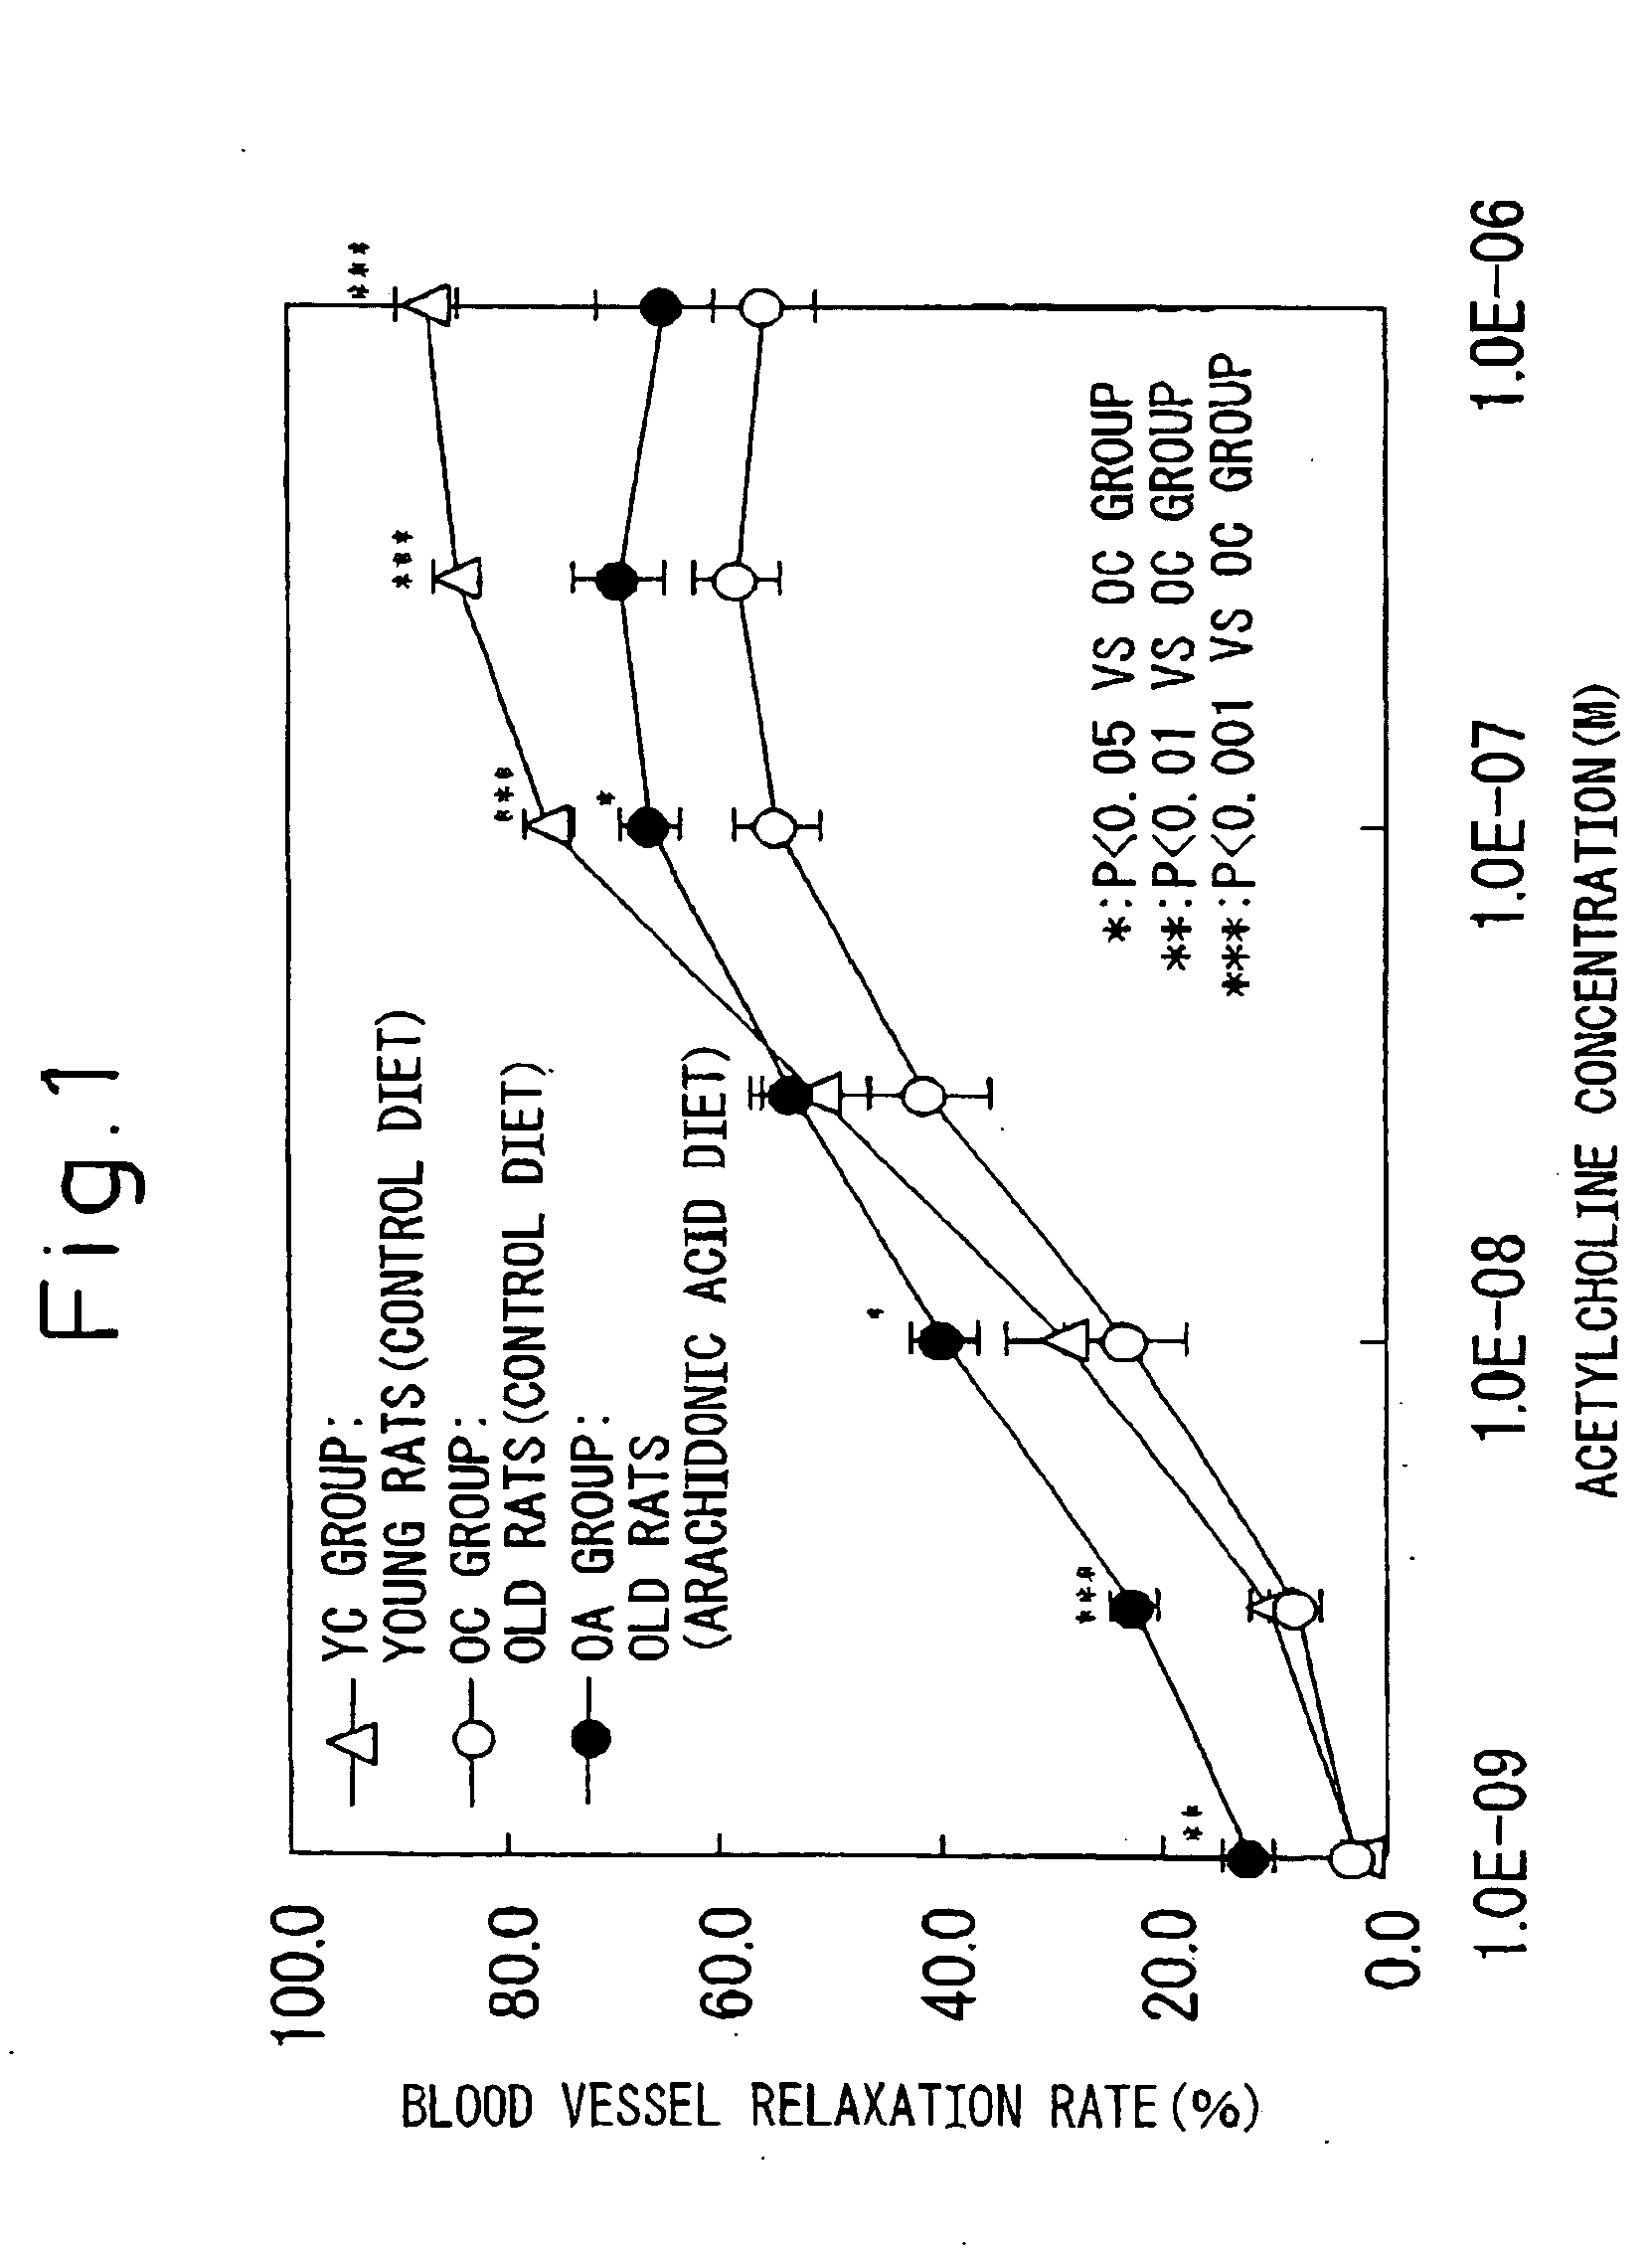 Composition having action preventing or alleviating symtoms or diseases due to aging of blood vessels